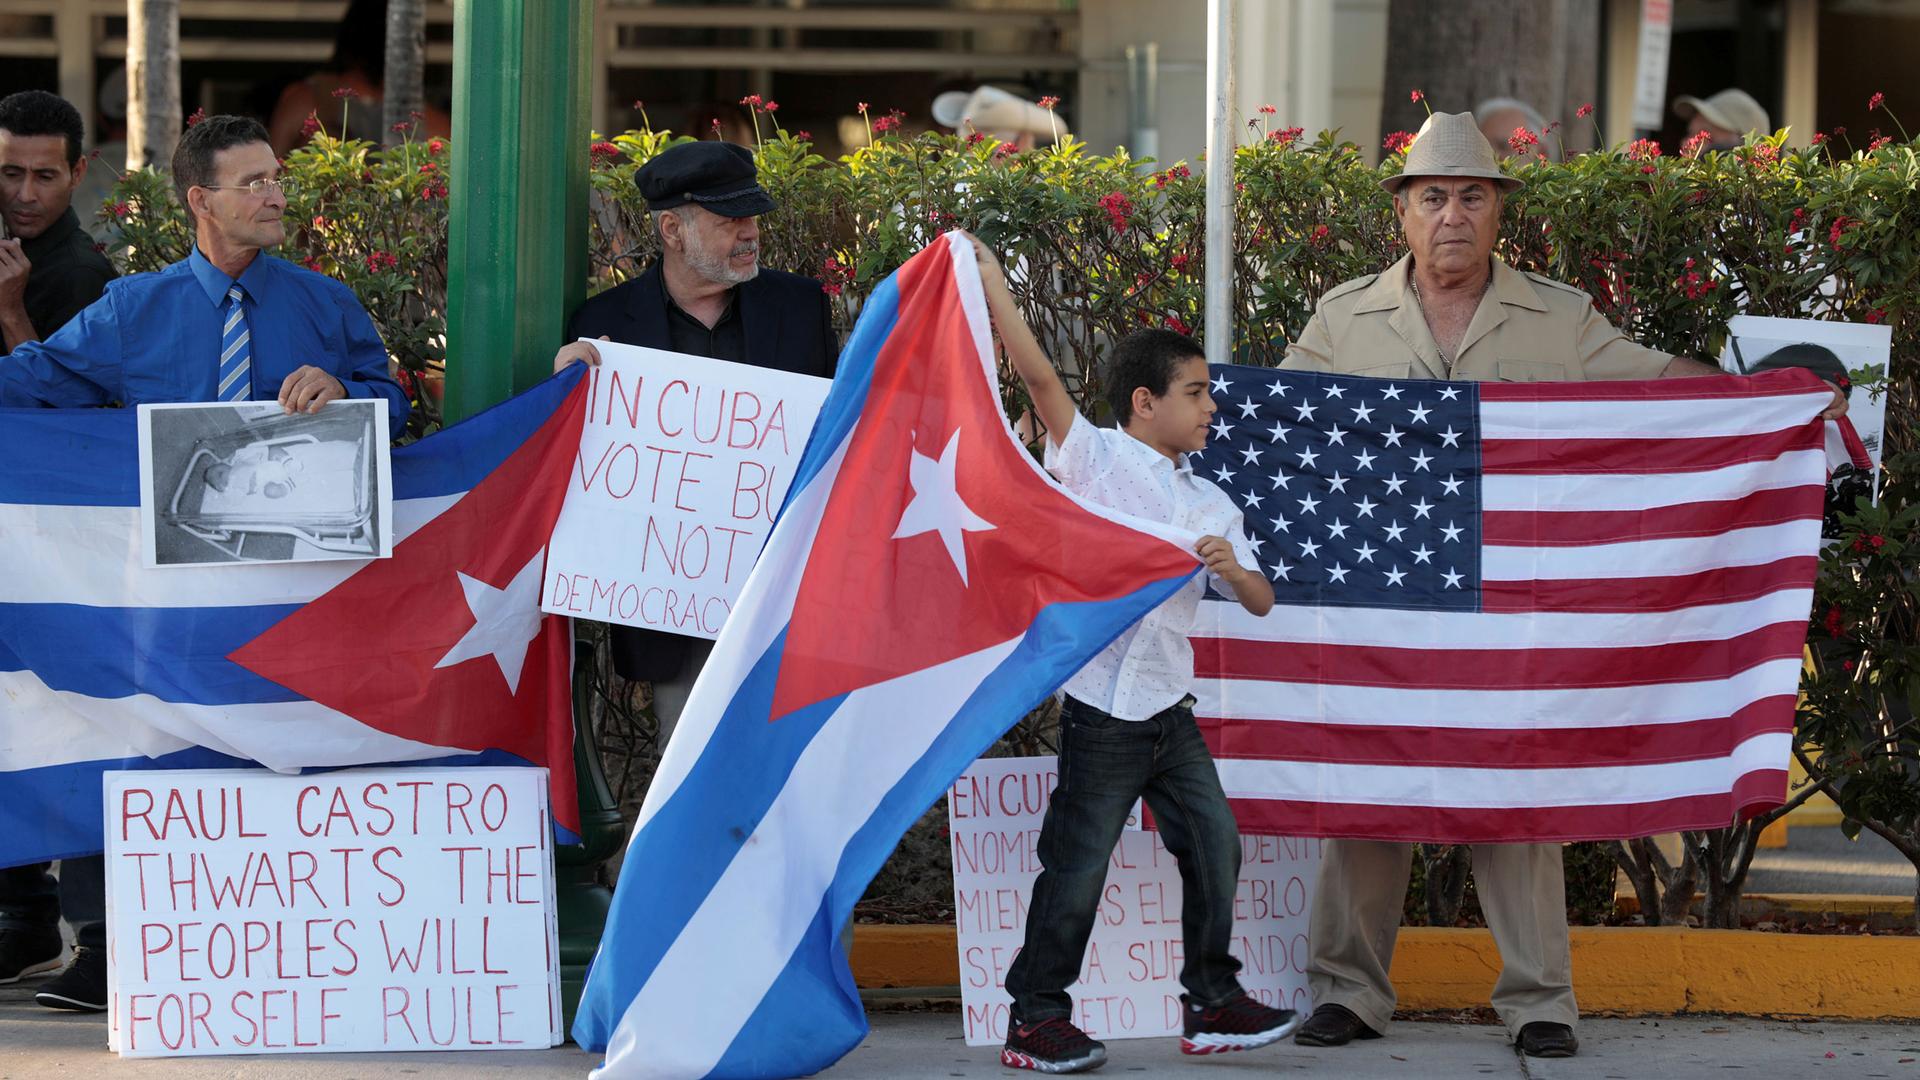 Cuban Americans protest Raul Castro leaving office as Cuba's president and Miguel Diaz Canel named as the new president, in Little Havana neighborhood in Miami, Florida